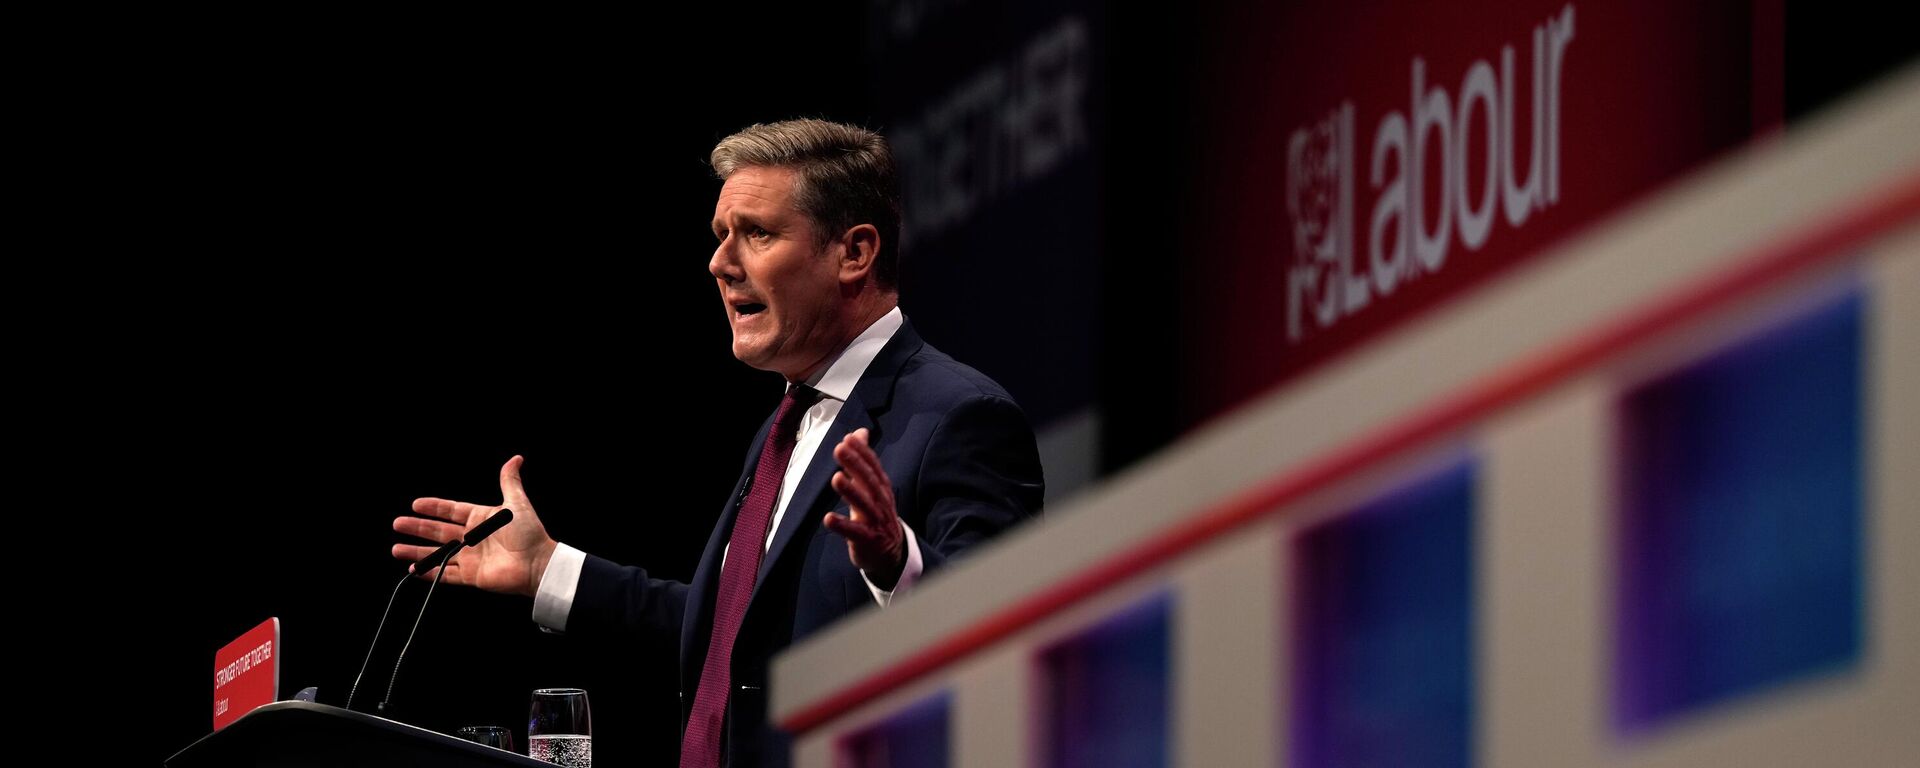 Leader of the British Labour Party Keir Starmer gestures as he makes his keynote speech at the annual party conference in Brighton, England, Wednesday, Sept. 29, 2021 - Sputnik International, 1920, 07.05.2022